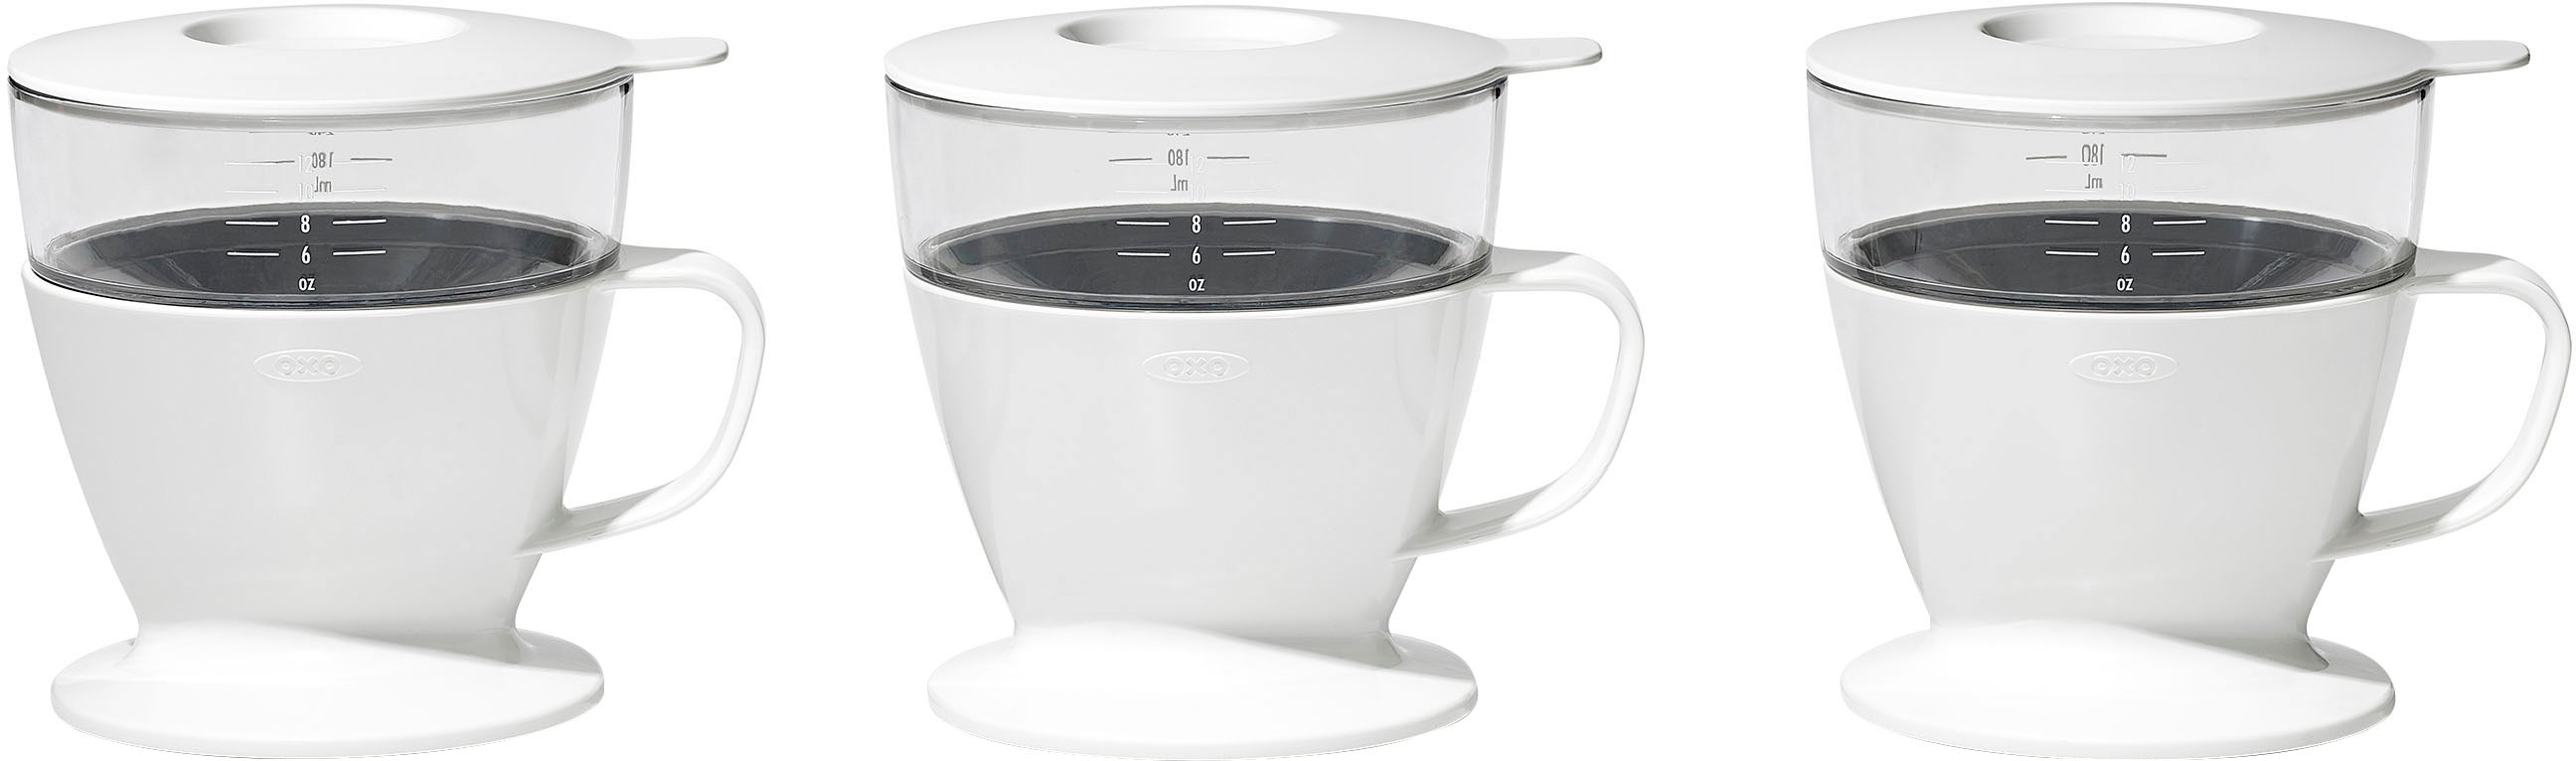 OXO Good Grips Pour Over Coffee Dripper is a Cut above the Rest